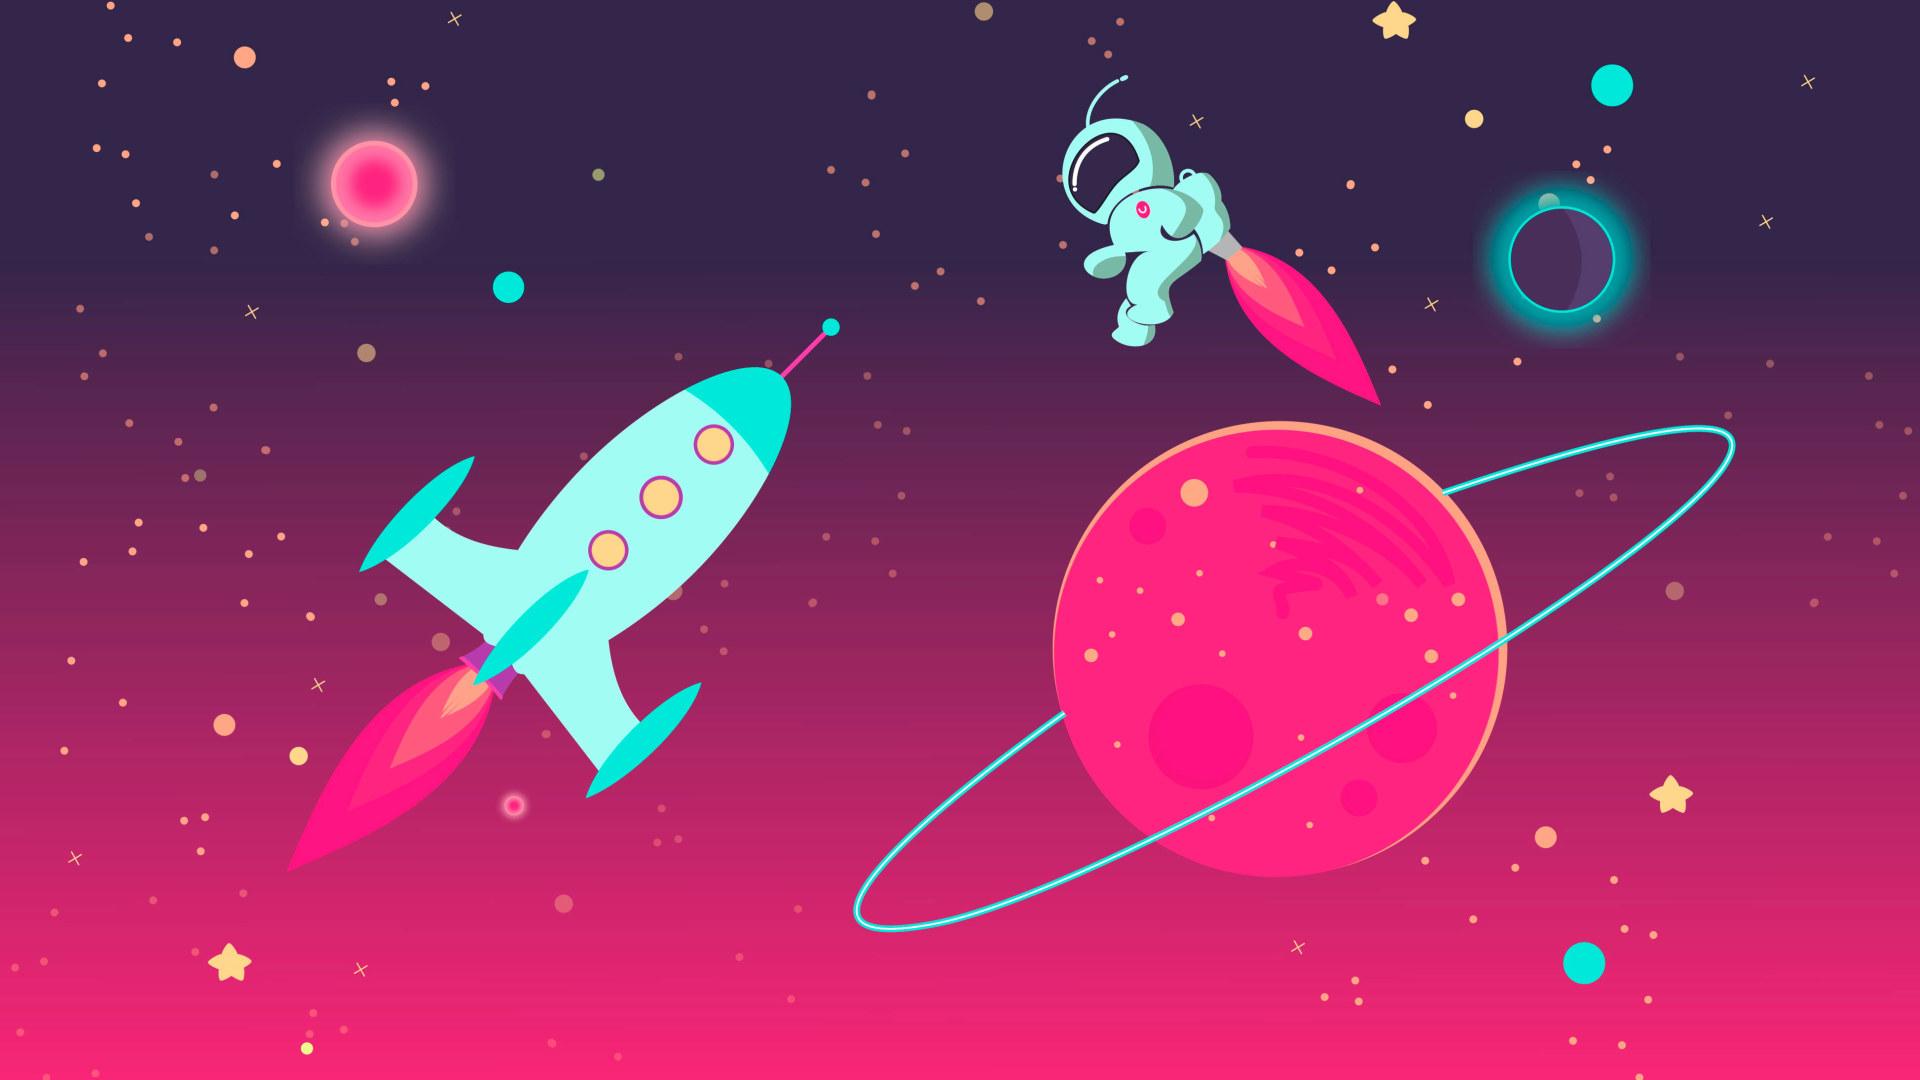 Cool Cartoon Space Wallpapers - Top Free Cool Cartoon Space Backgrounds